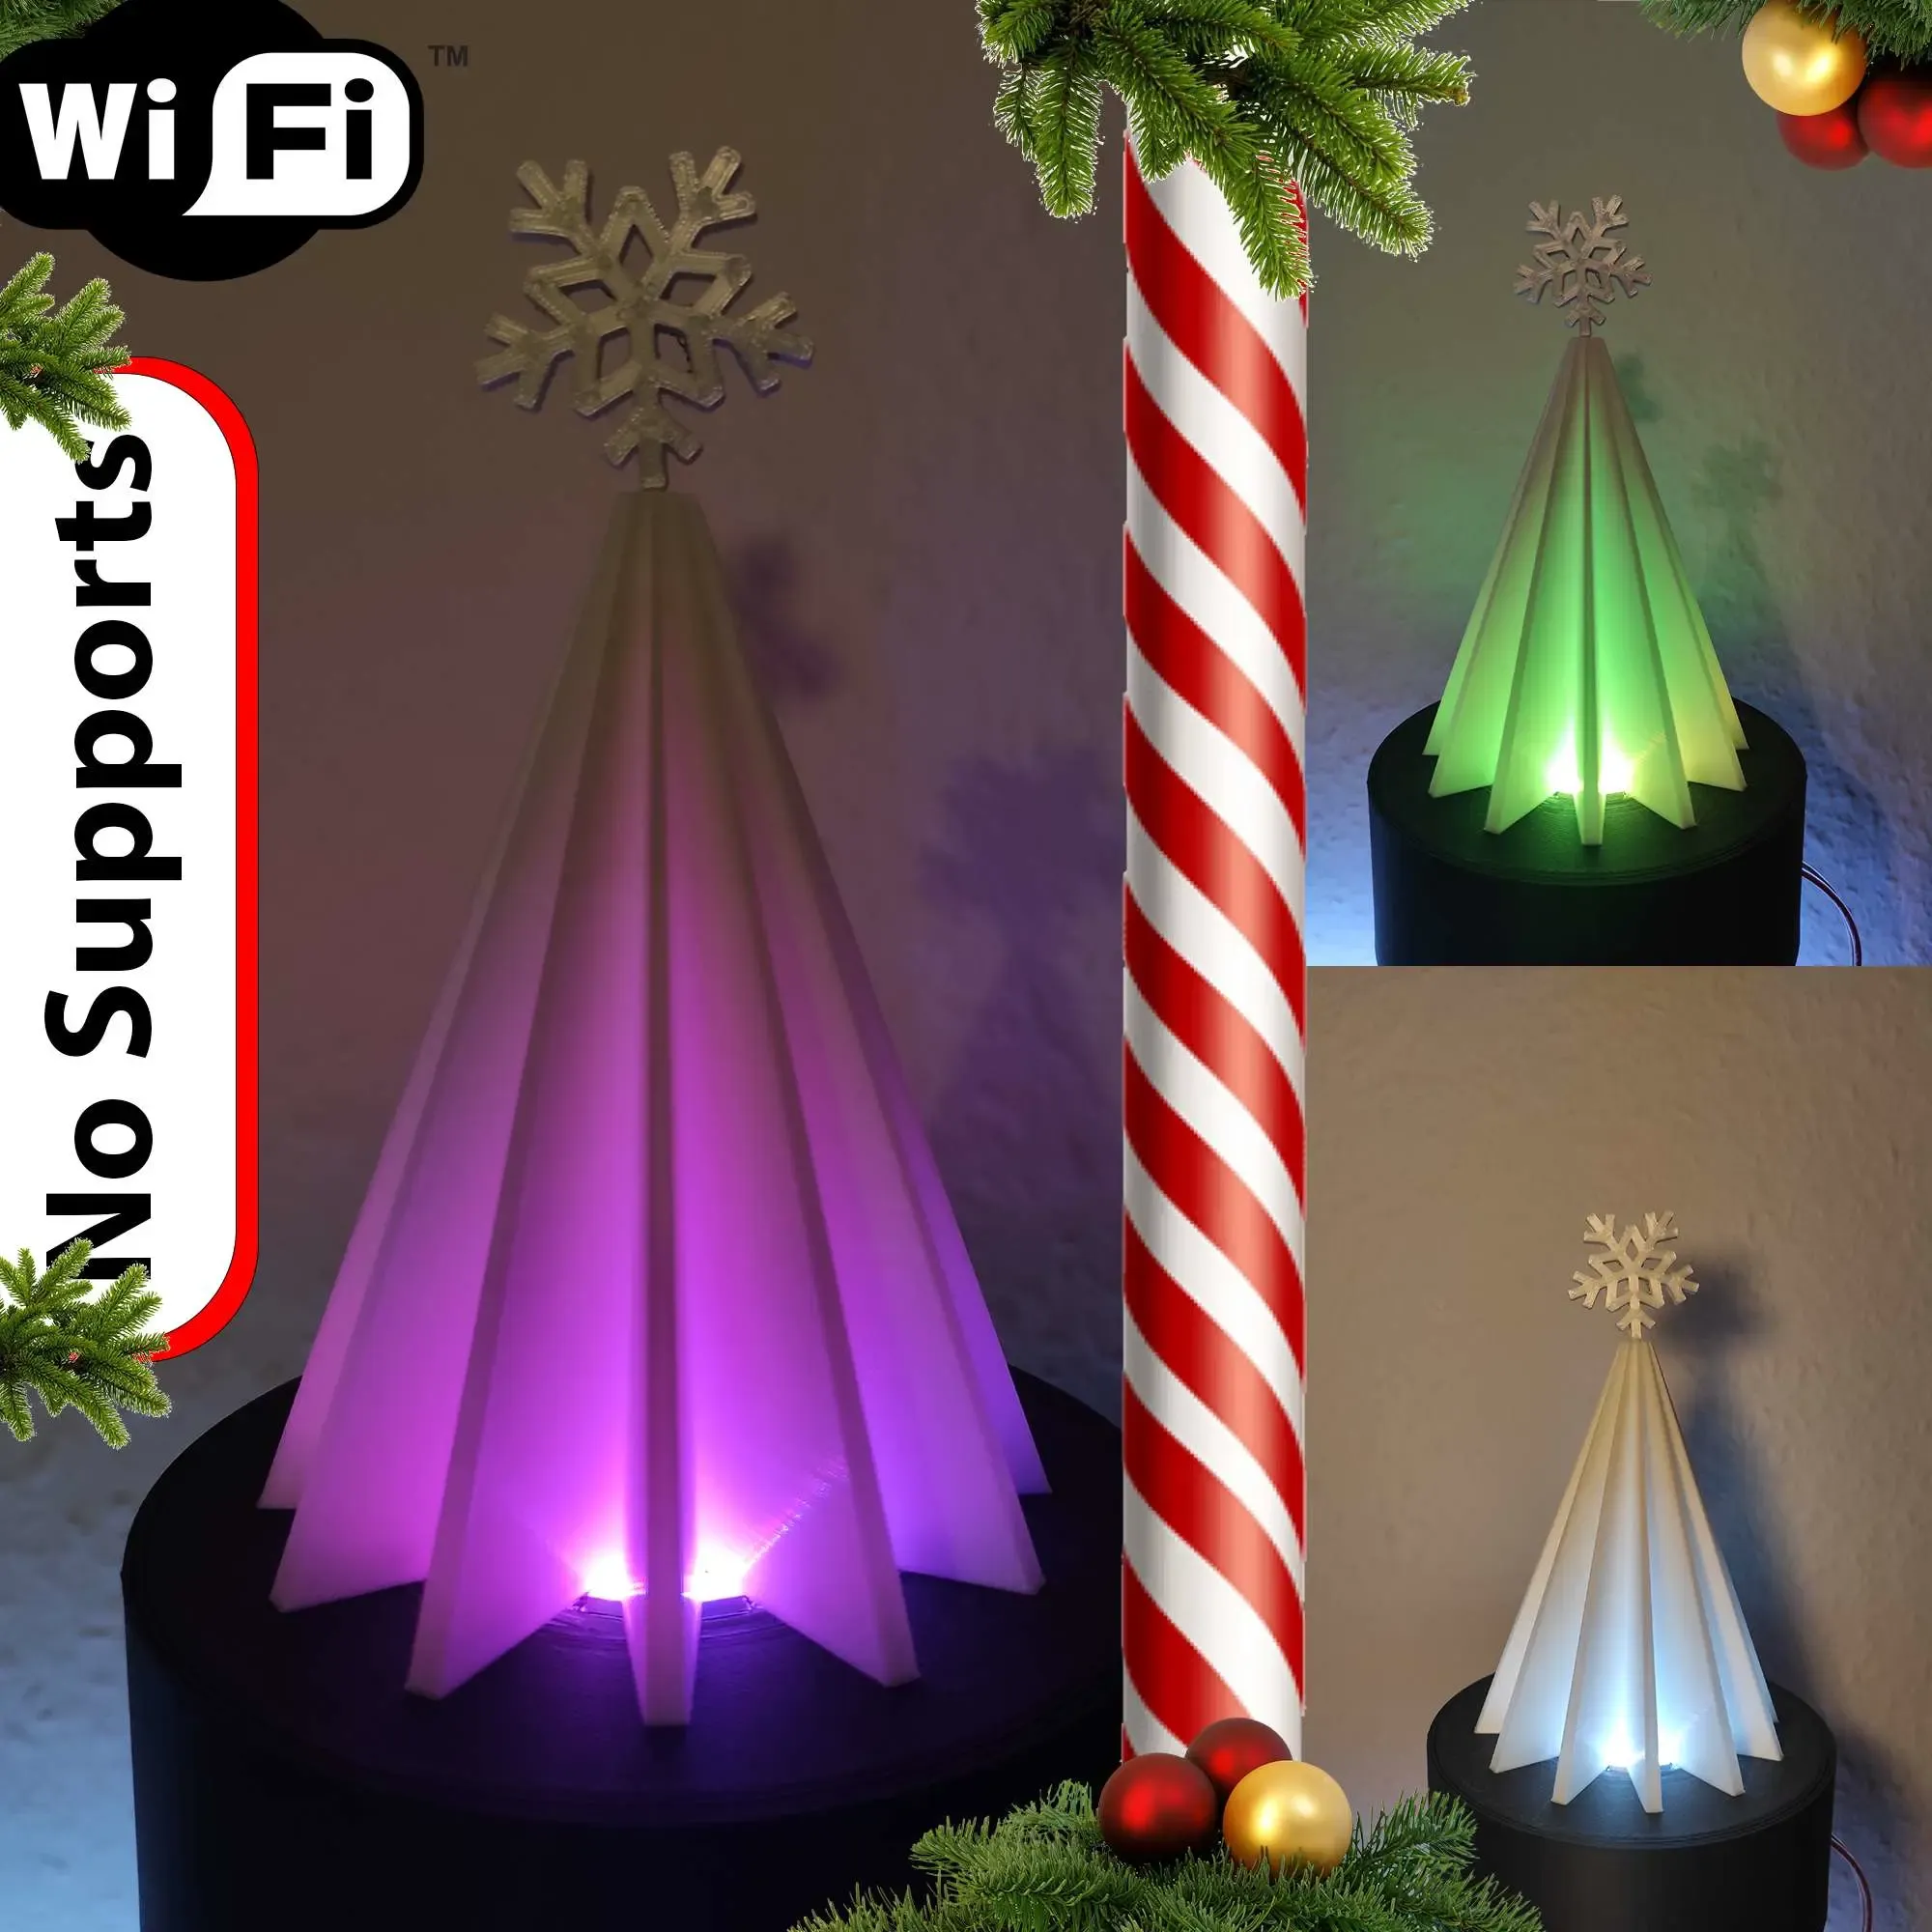 RGB Christmas Light! Wifi controlled and fully DIY! #Xmas